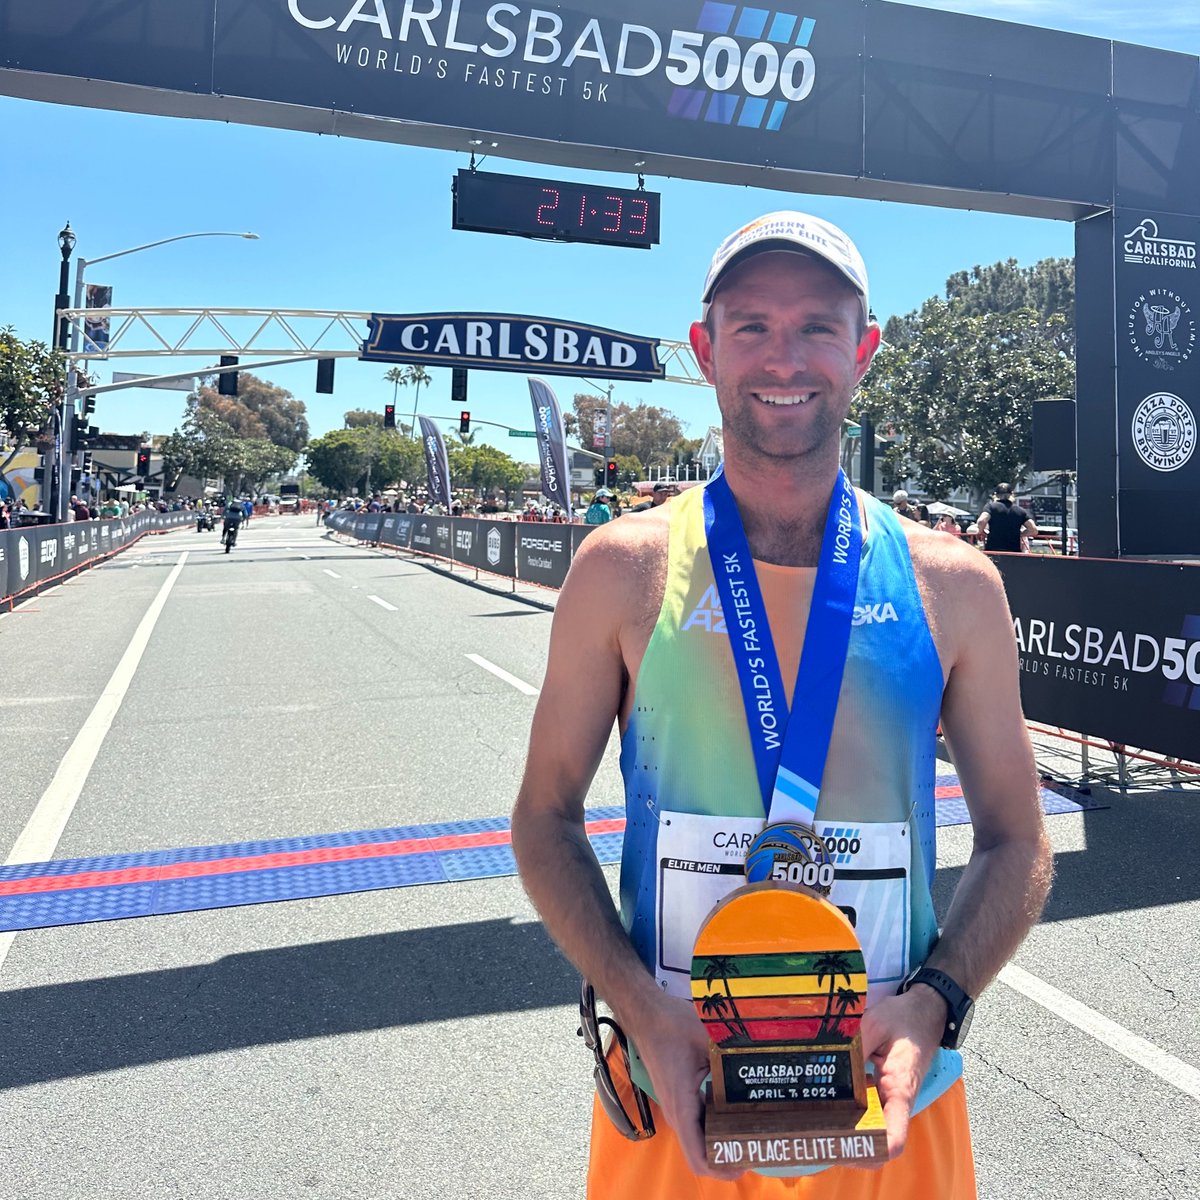 CONGRATS @MattRBaxter!! A very close 2nd at the #Carlsbad5000. Closed out an awesome weekend for the team!!